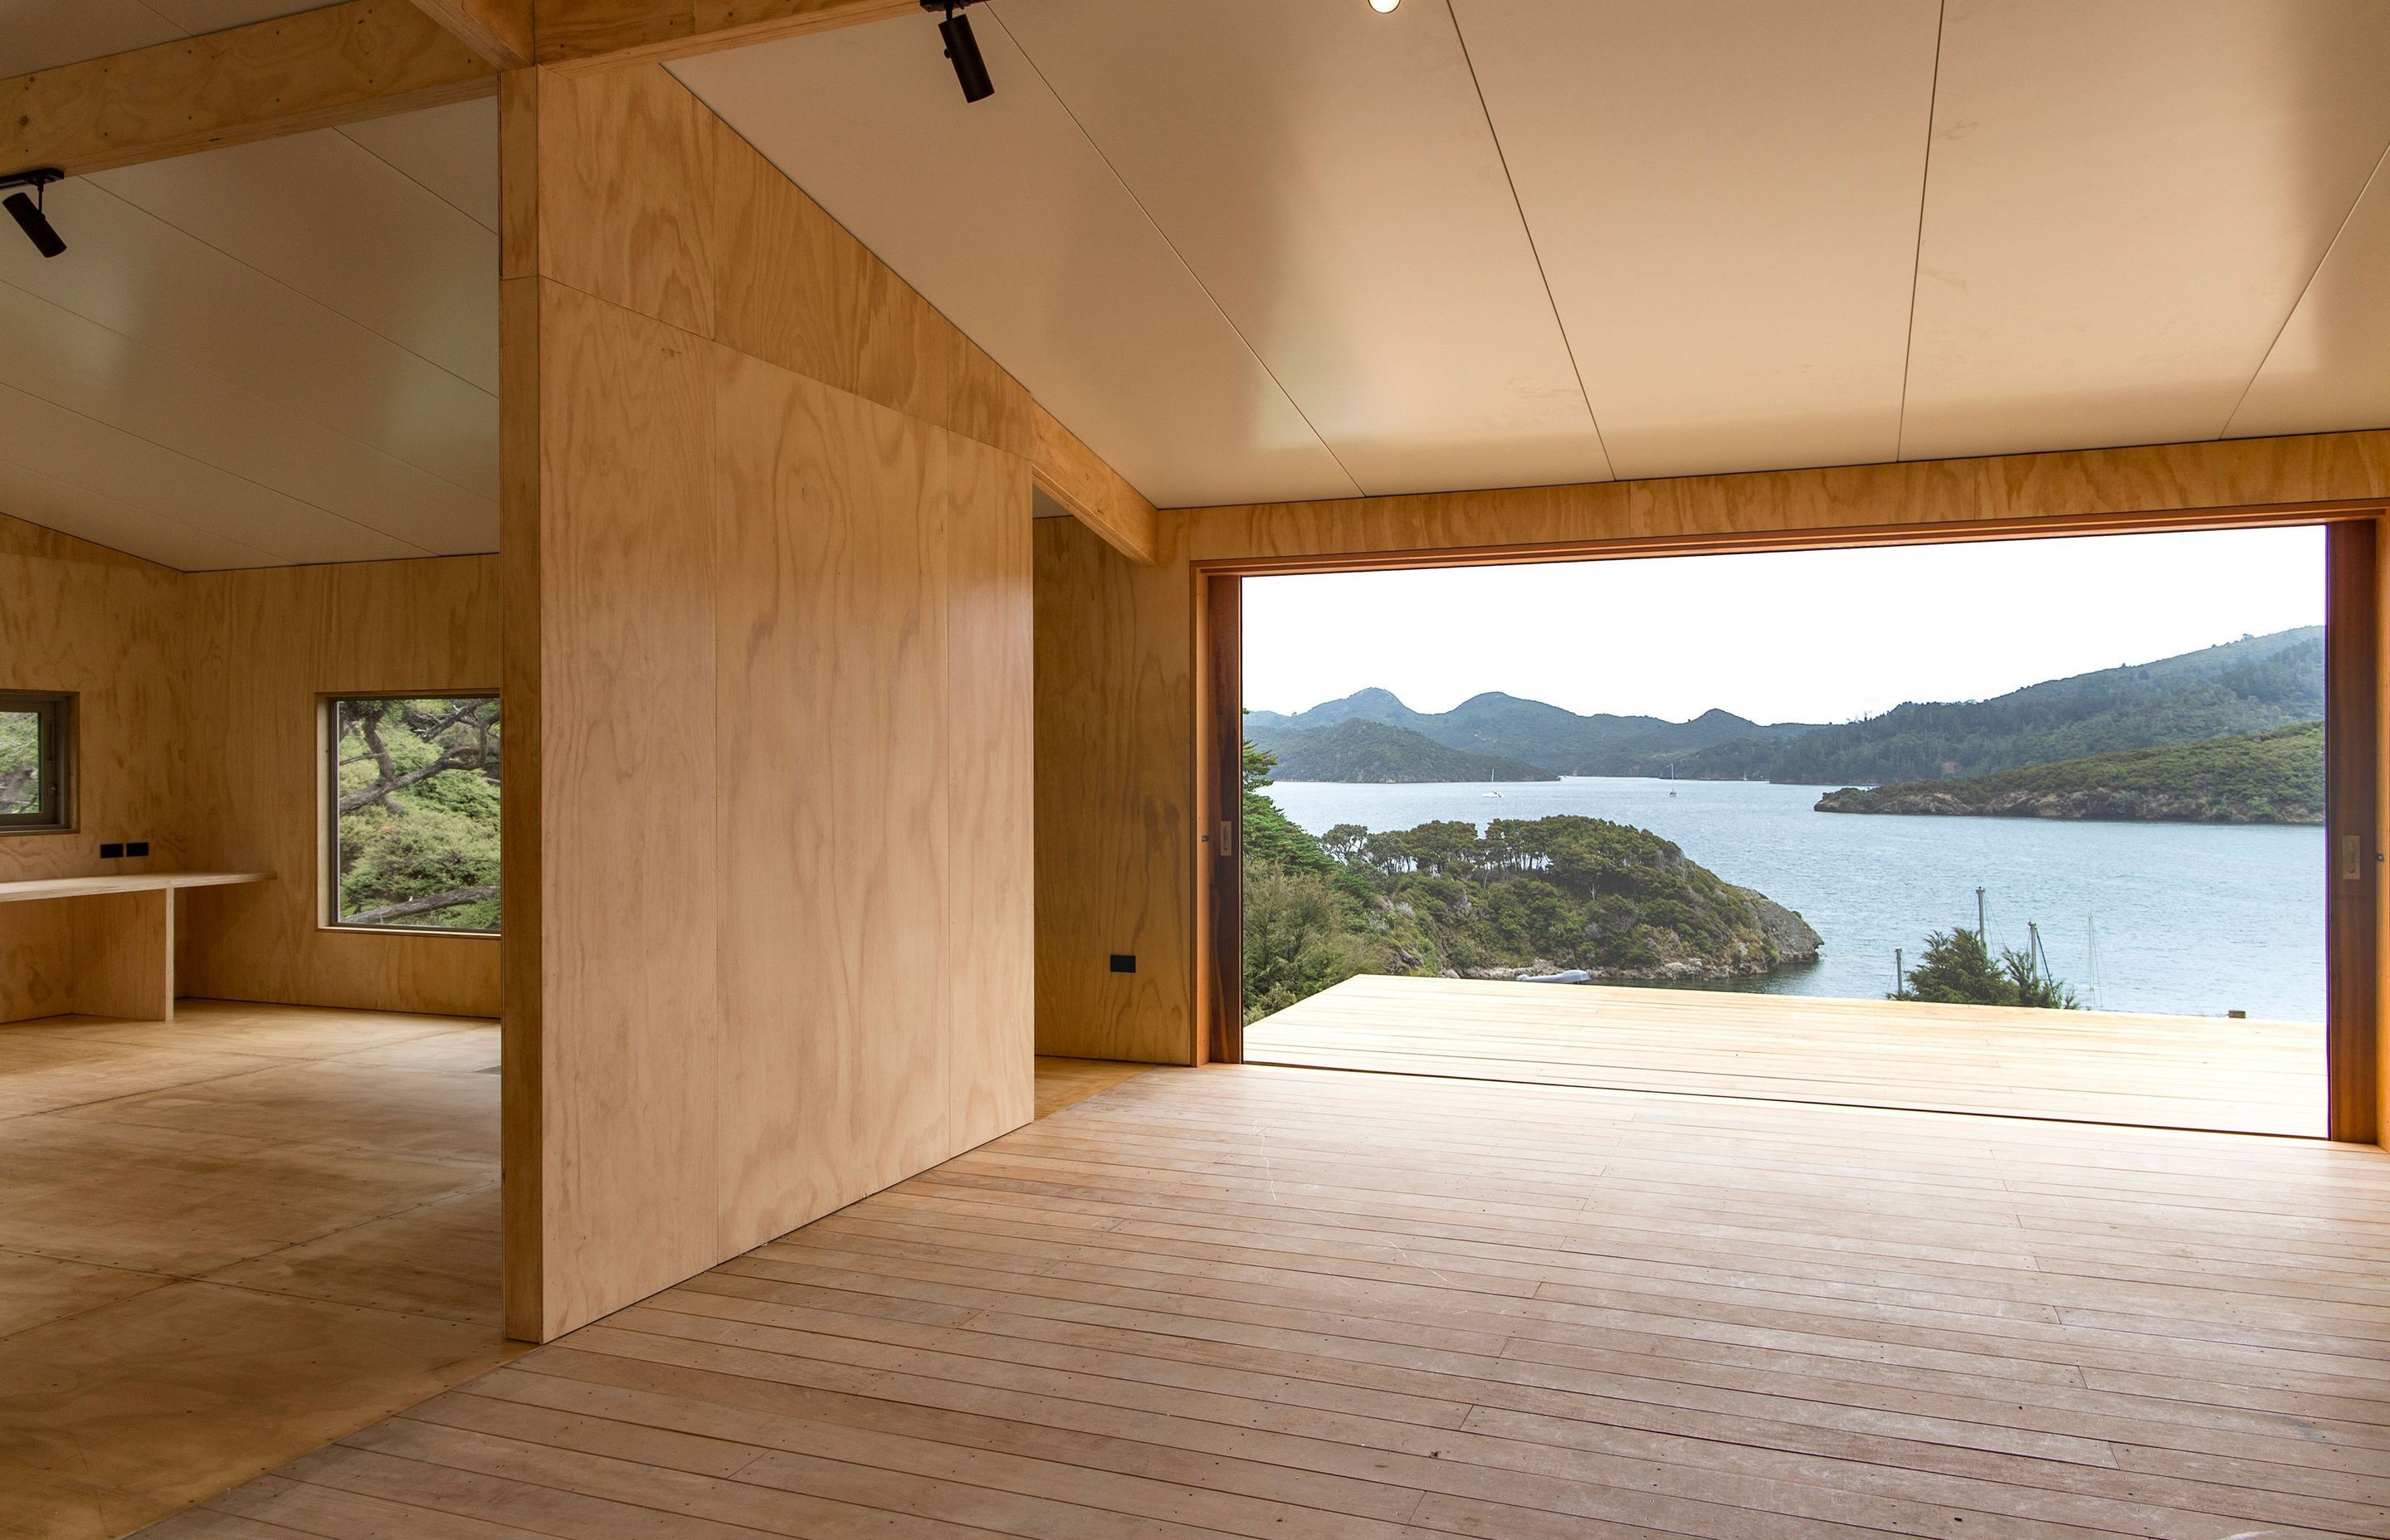 Photos shown are of Motu Kaikoura - Lodge by SGA Architects. Motu is a protected scenic reserve north-west of Great Barrier Island and the projet used Metalcraft Insulated Panels -Thermospan product on the roof and Metalcraft Roofings Corrugate profile as